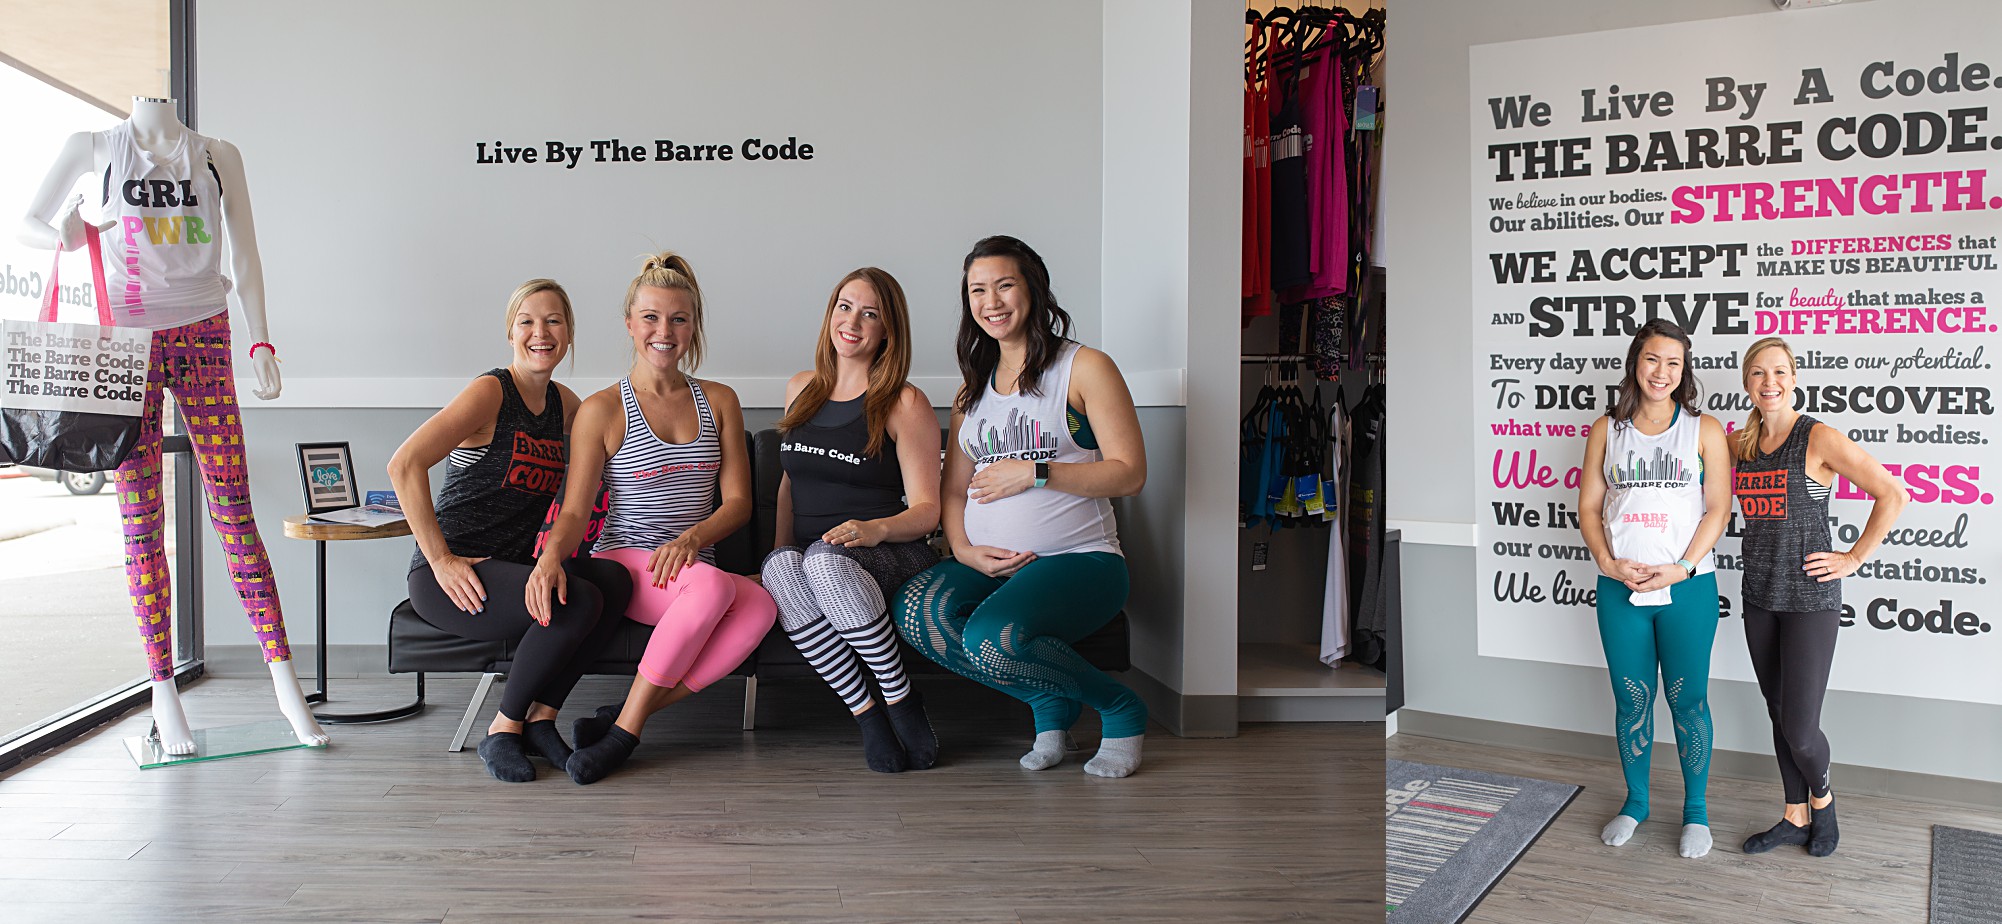 Plano Maternity Workout Session at The Barre Code Plano